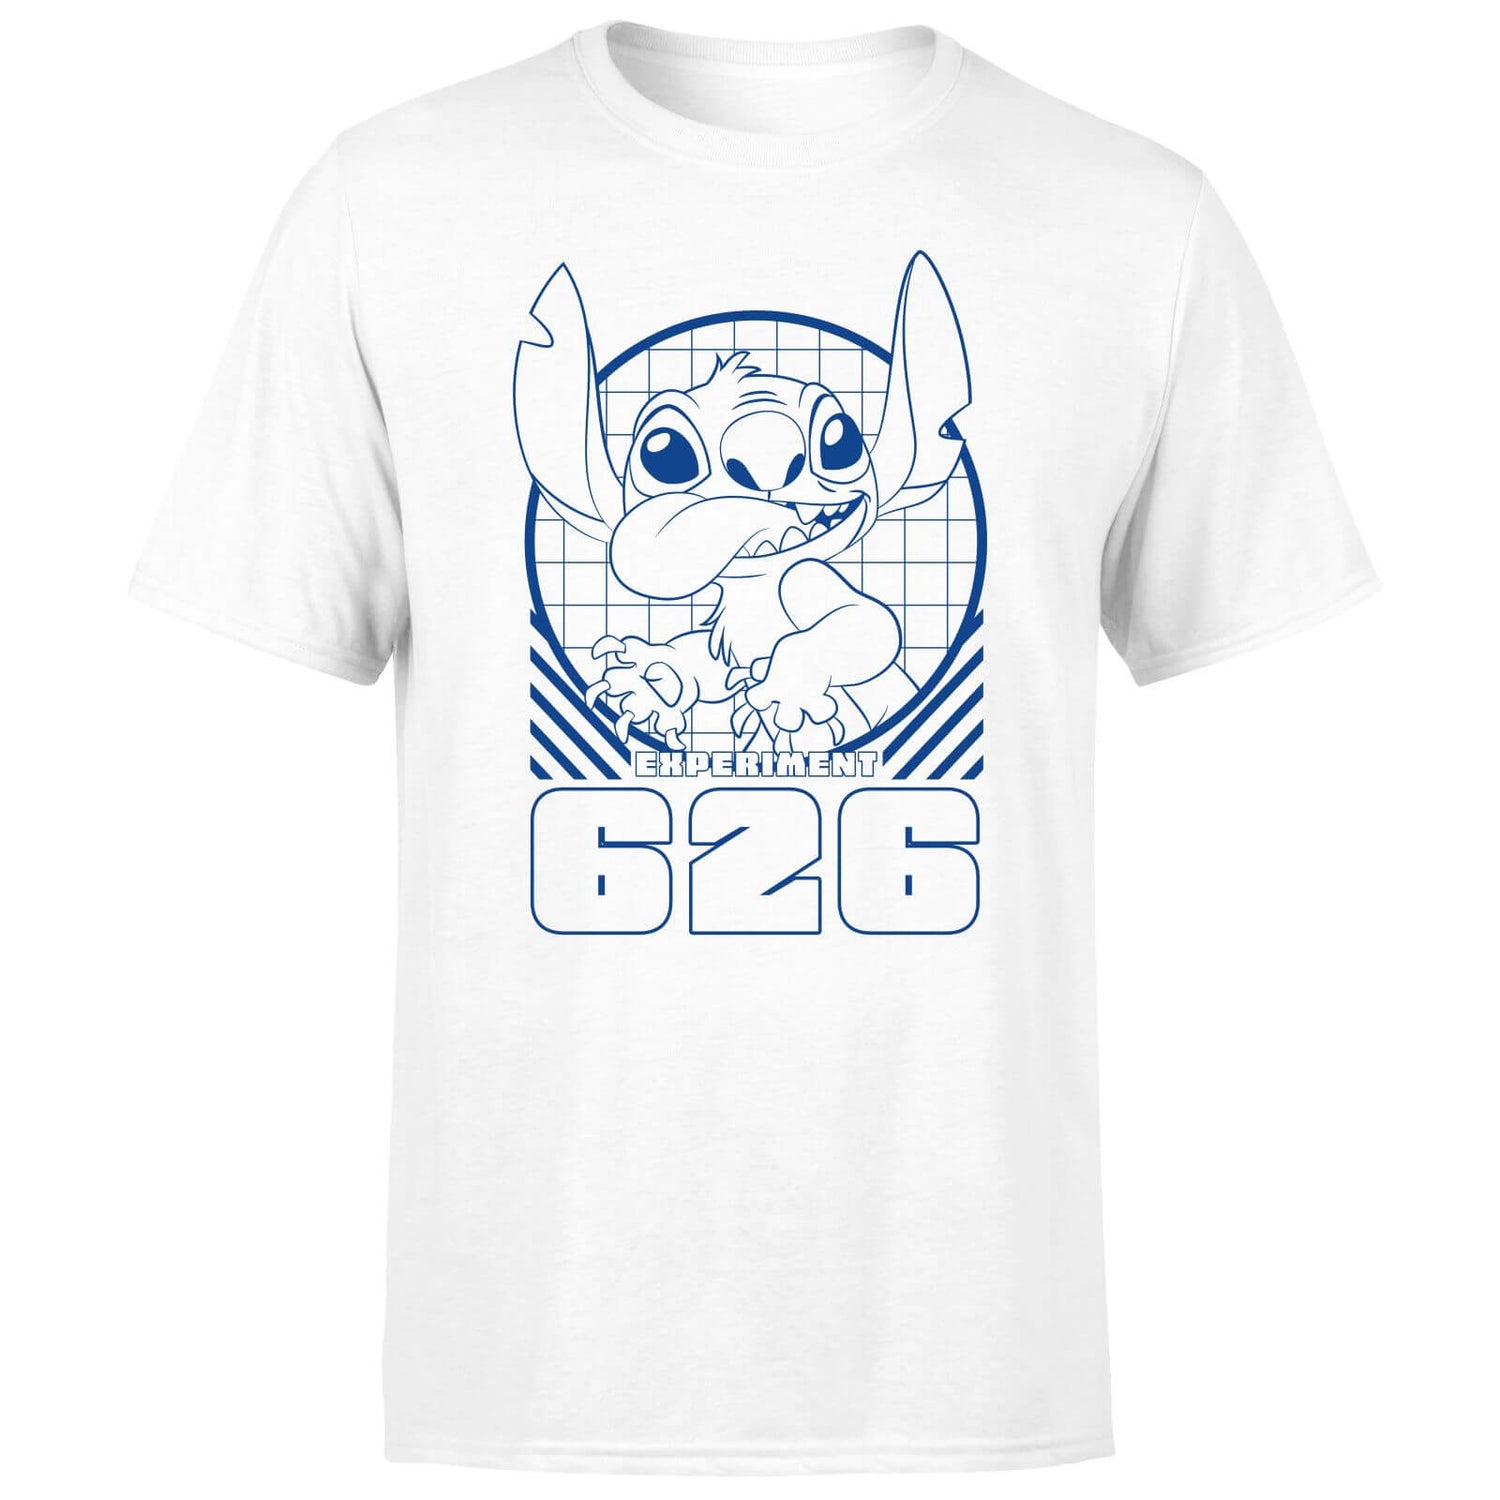 Lilo And Stitch Warning Experiment 626 Men's T-Shirt - White